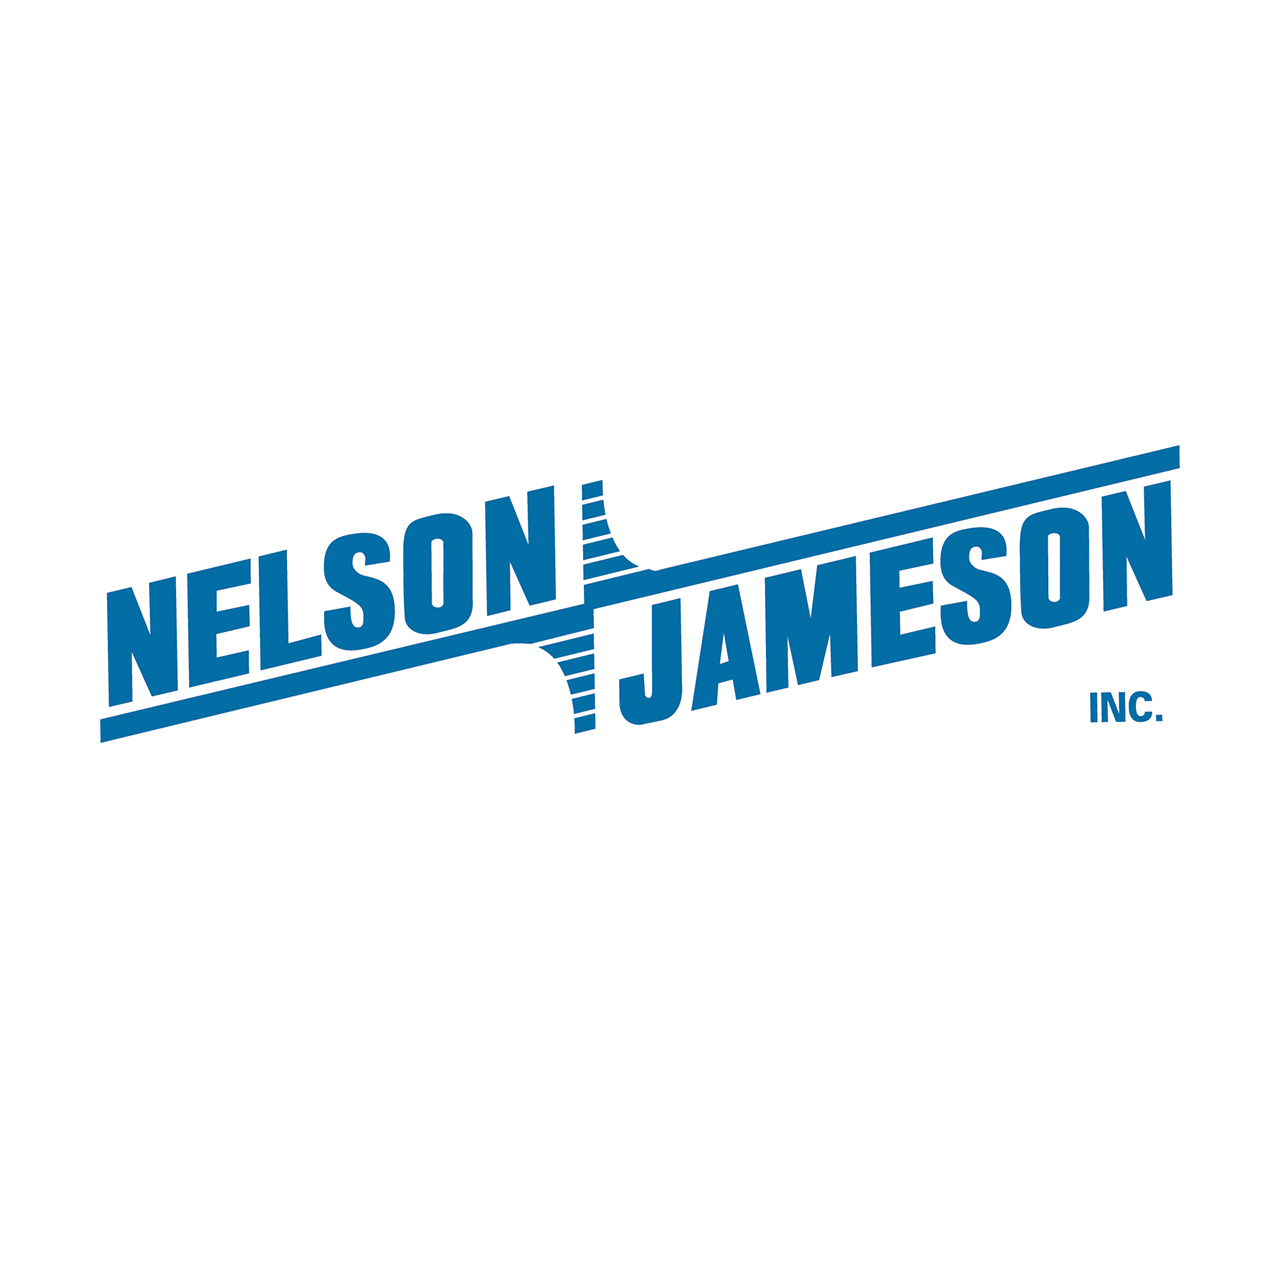 Nelson-Jameson Spirit-Filled "Accu Safe" Incubator Certified Bottled Thermometers